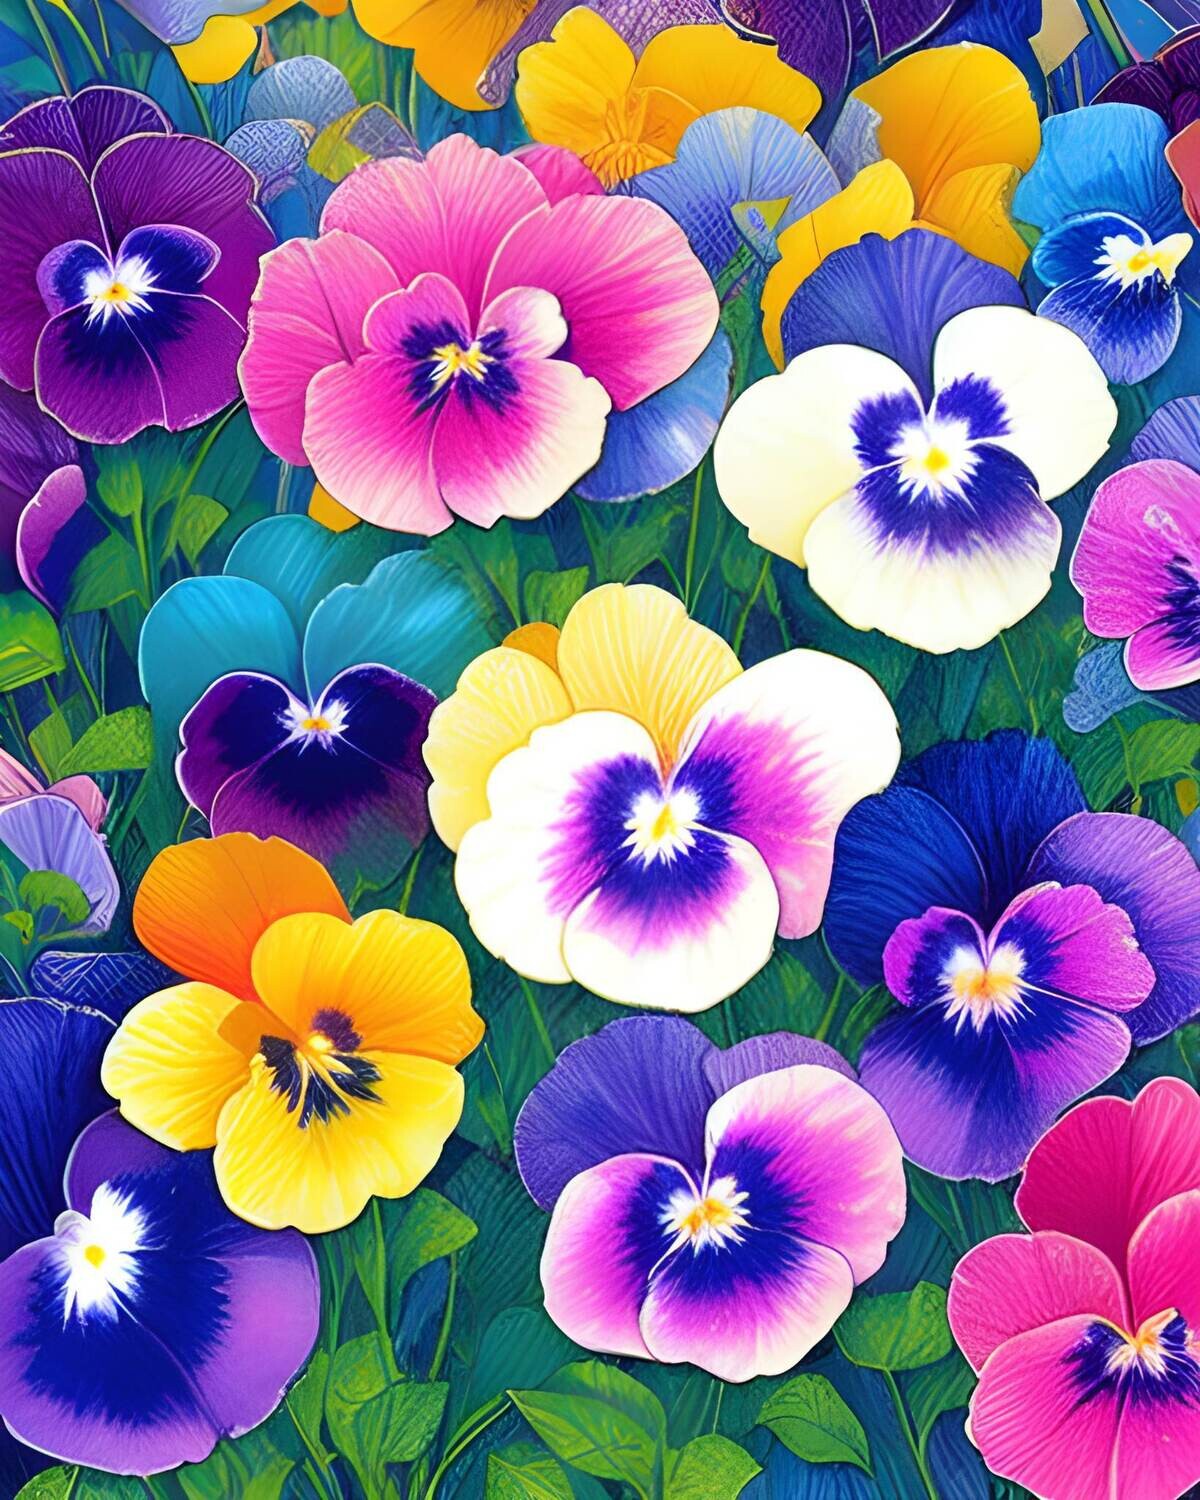 Pansies 99 - 30 x 40cm Full Drill (Round) with AB drills - POURED GLUE - Diamond Painting Kit